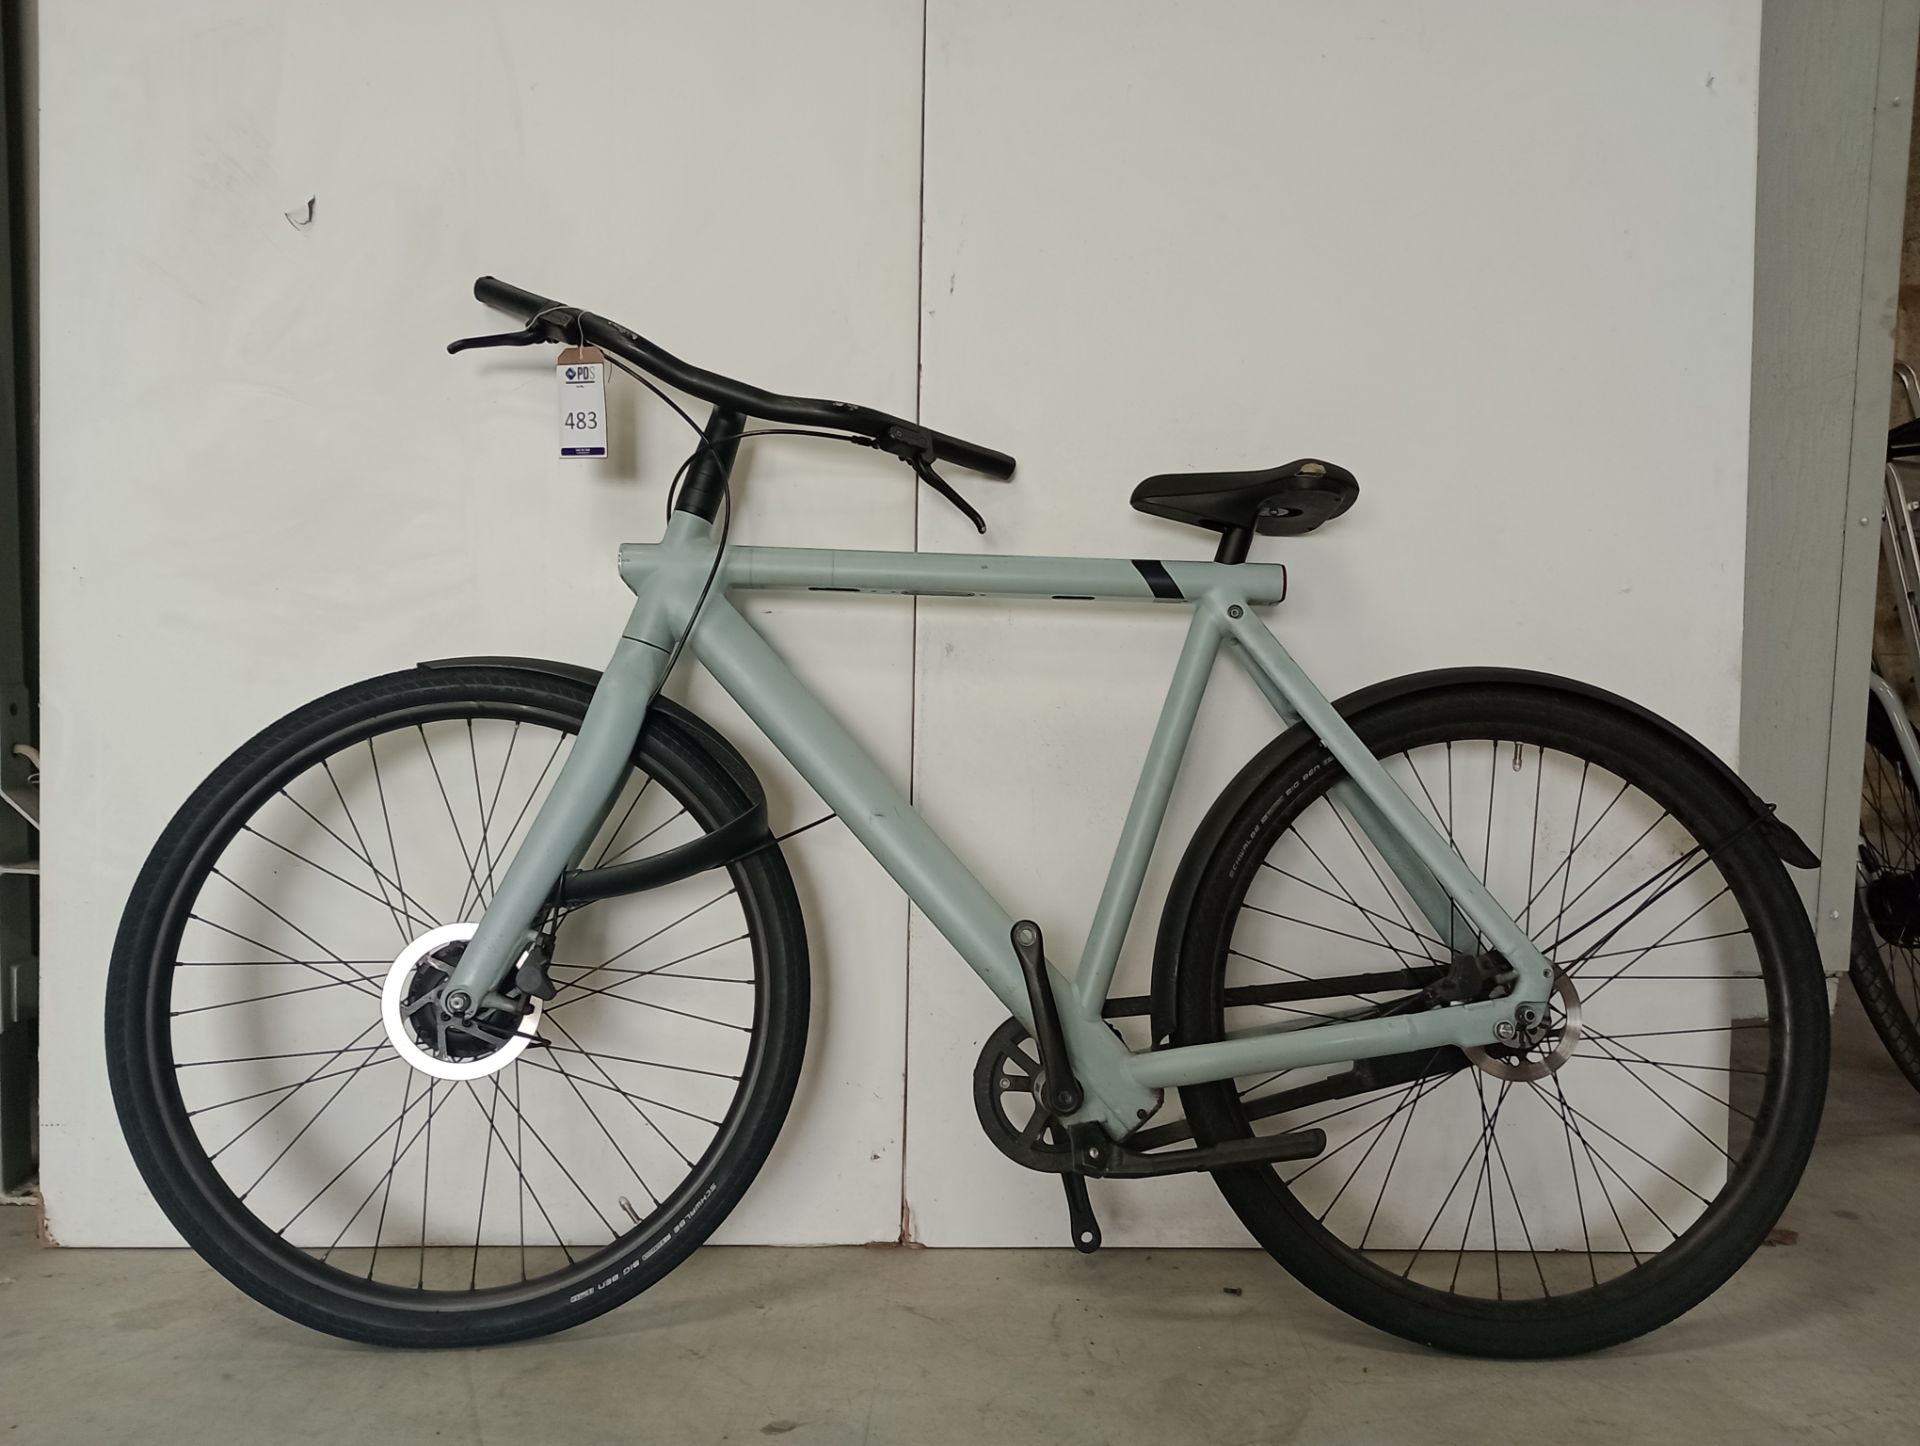 VanMoof S3 Electric Bike, Frame Number ASY1032412 (NOT ROADWORTHY - FOR SPARES ONLY) (No codes